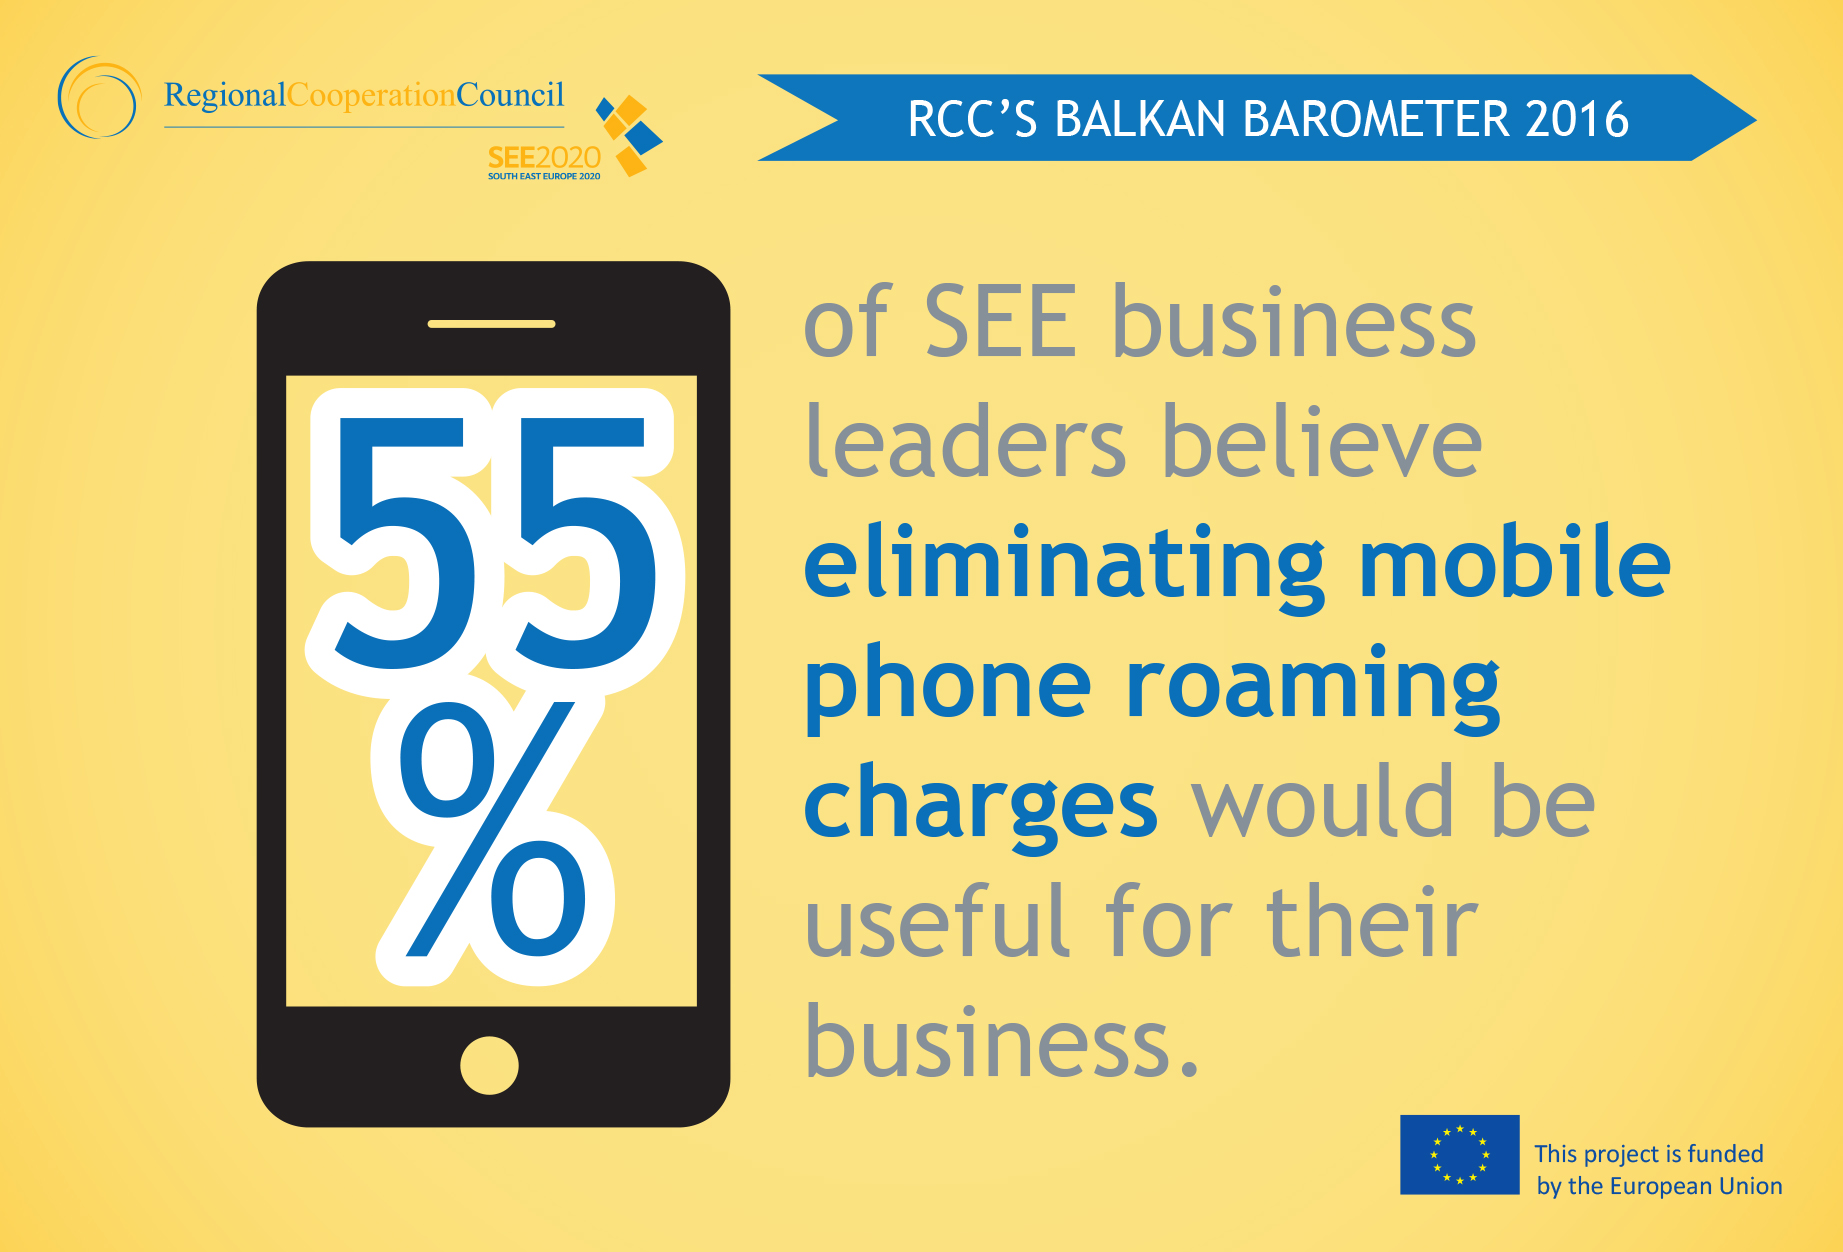 RCC’S BALKAN BAROMETER 2016: 55% of SEE business leaders believe eliminating mobile phone roaming charges would be useful for their business.